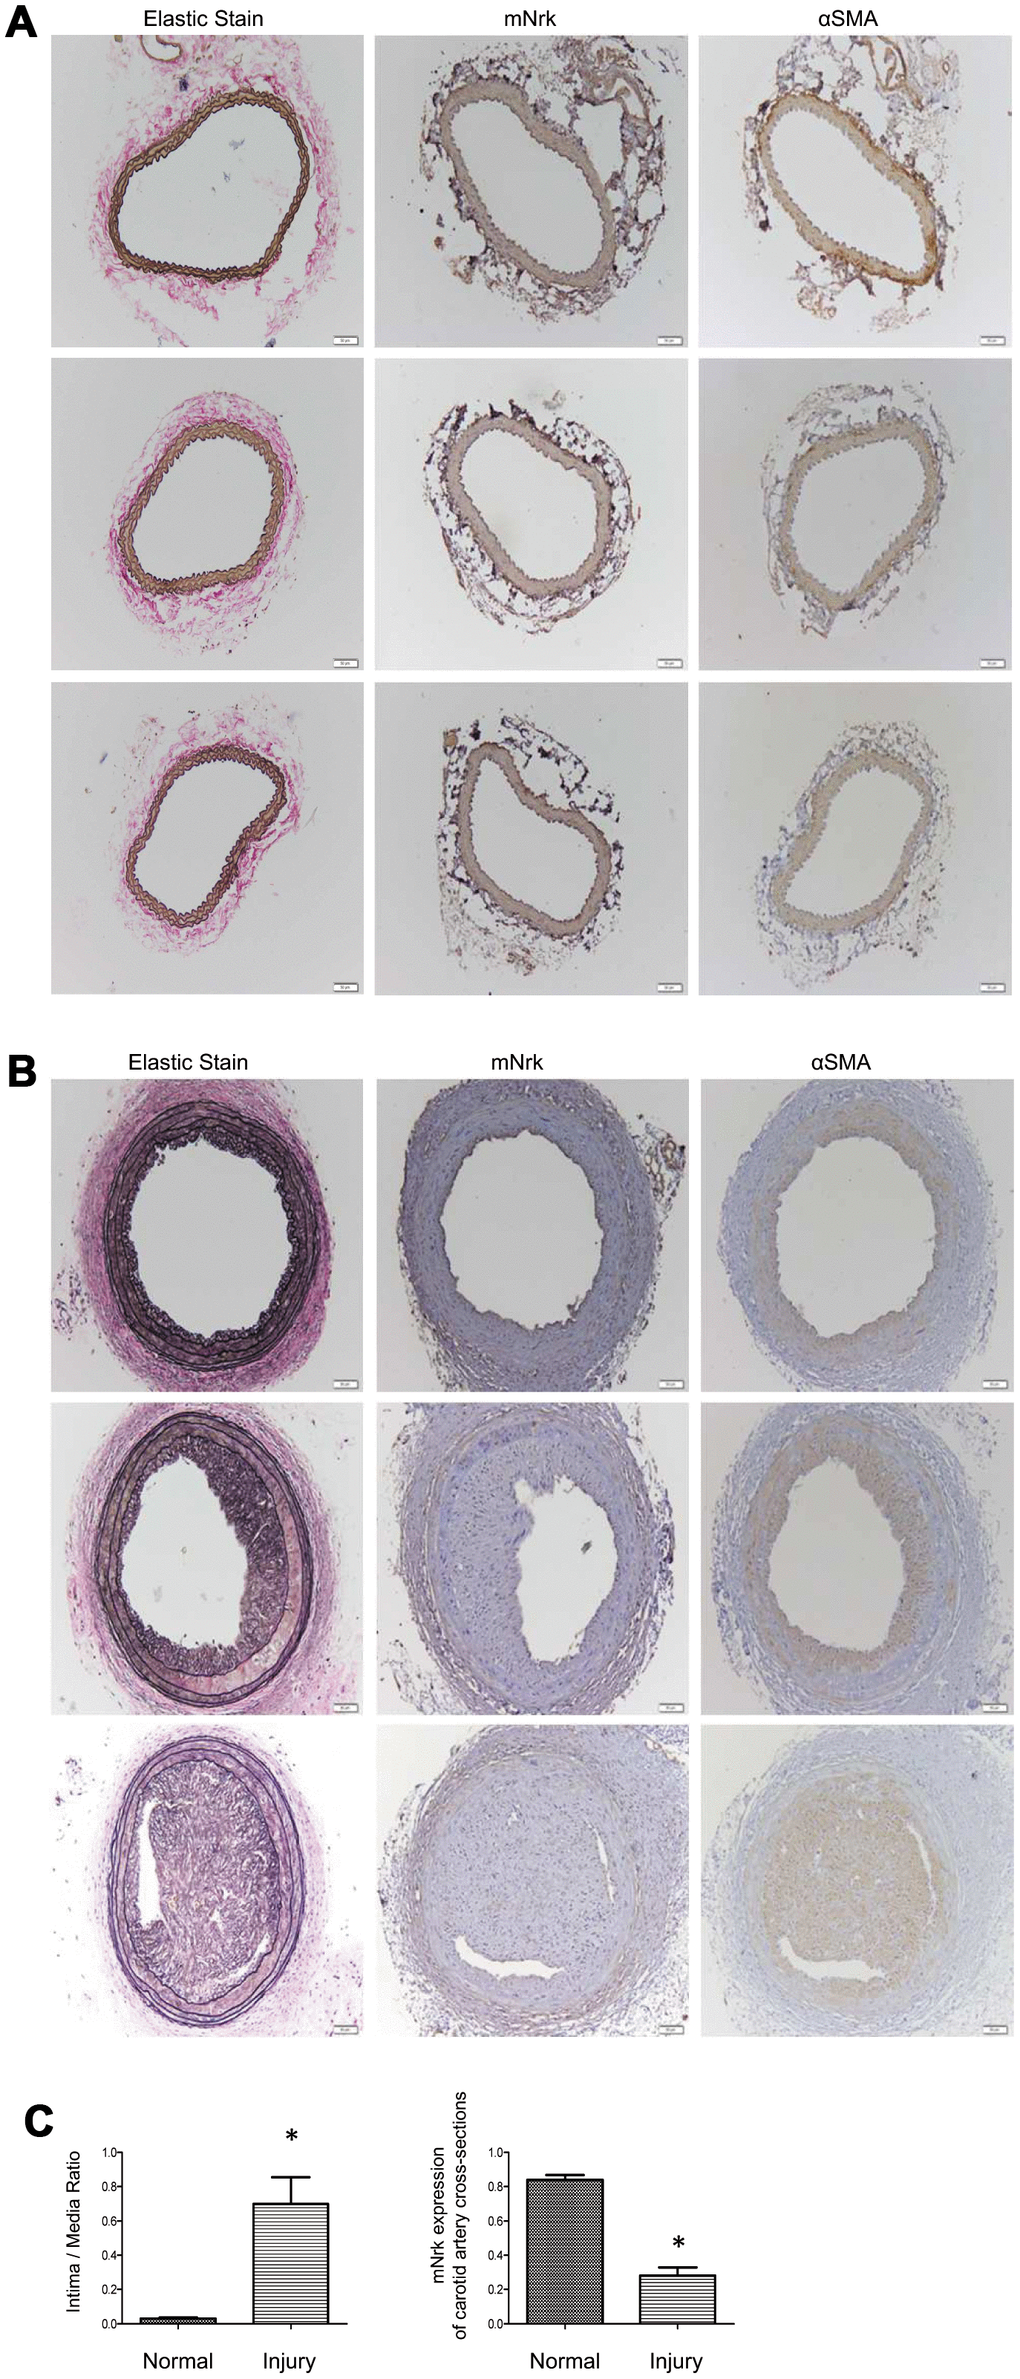 Expression of mNrk, αSMA, and elastic staining in carotid artery of wild-type C57BL/6 mice subjected to guide wire injury for 4 weeks. The expression of mNrk, αSMA, and elastic staining in three set of sections of (A) non-injured and (B) injured carotid arteries at 150-μm intervals was examined by immunohistochemical staining. Bar = 50 μM. (C) Left panel: Quantitation of intima/media (I/M) ratio (left panel, p = 0.00056) and Nrk expression (right panel, p = 1.184 × 10-5) in normal and injured carotid arteries. n = 9 for each group.